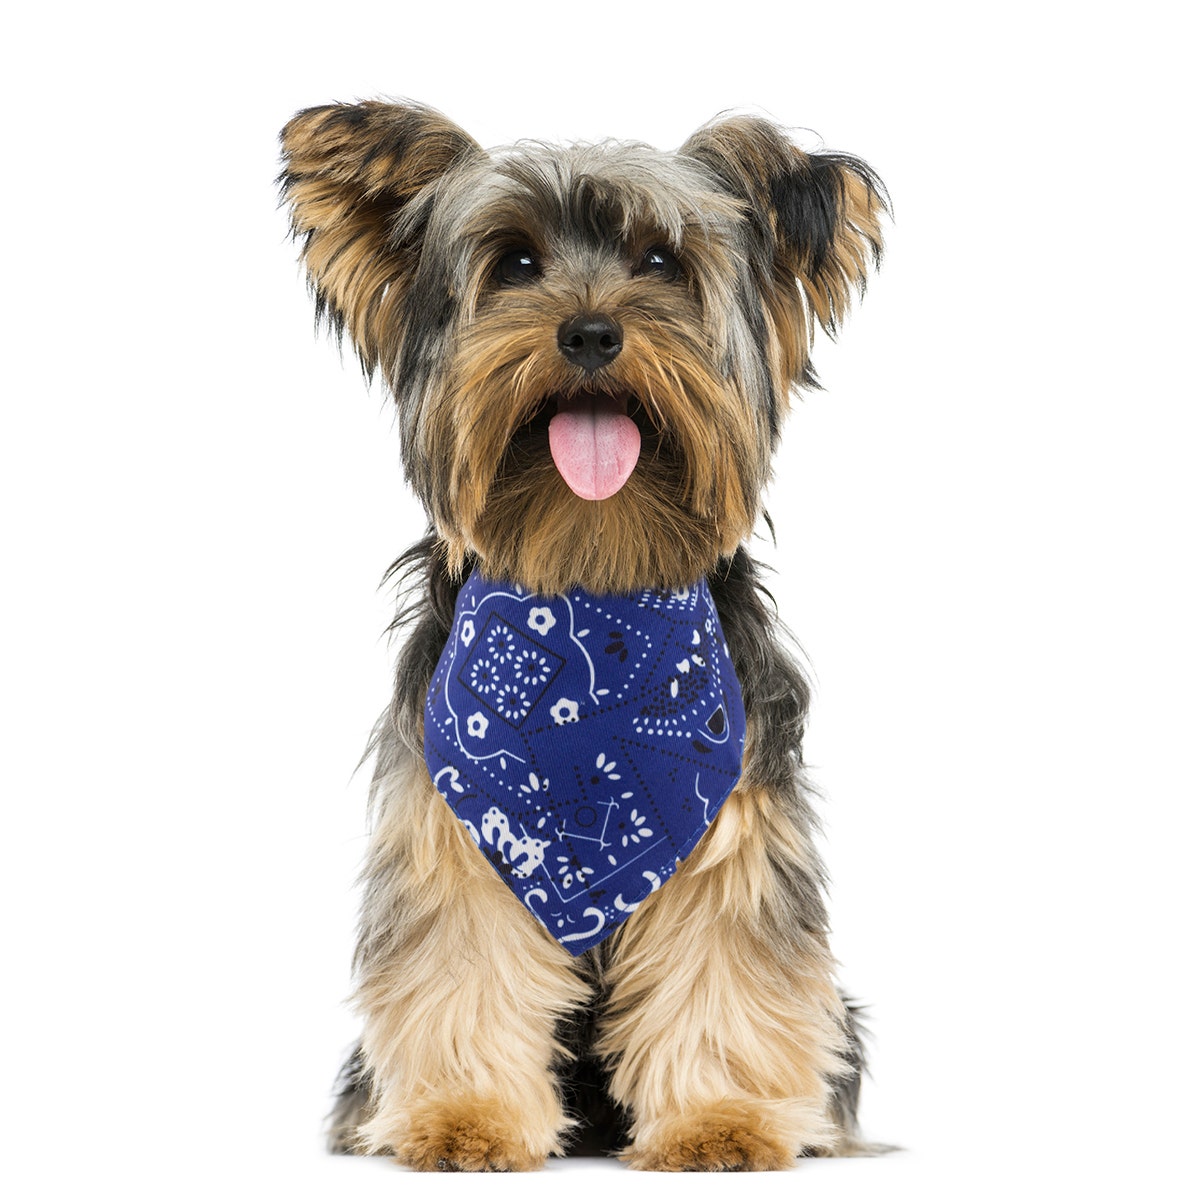 Yorkie Yorkshire Terrier Dog Costume Face Mask - Off the Wall Toys